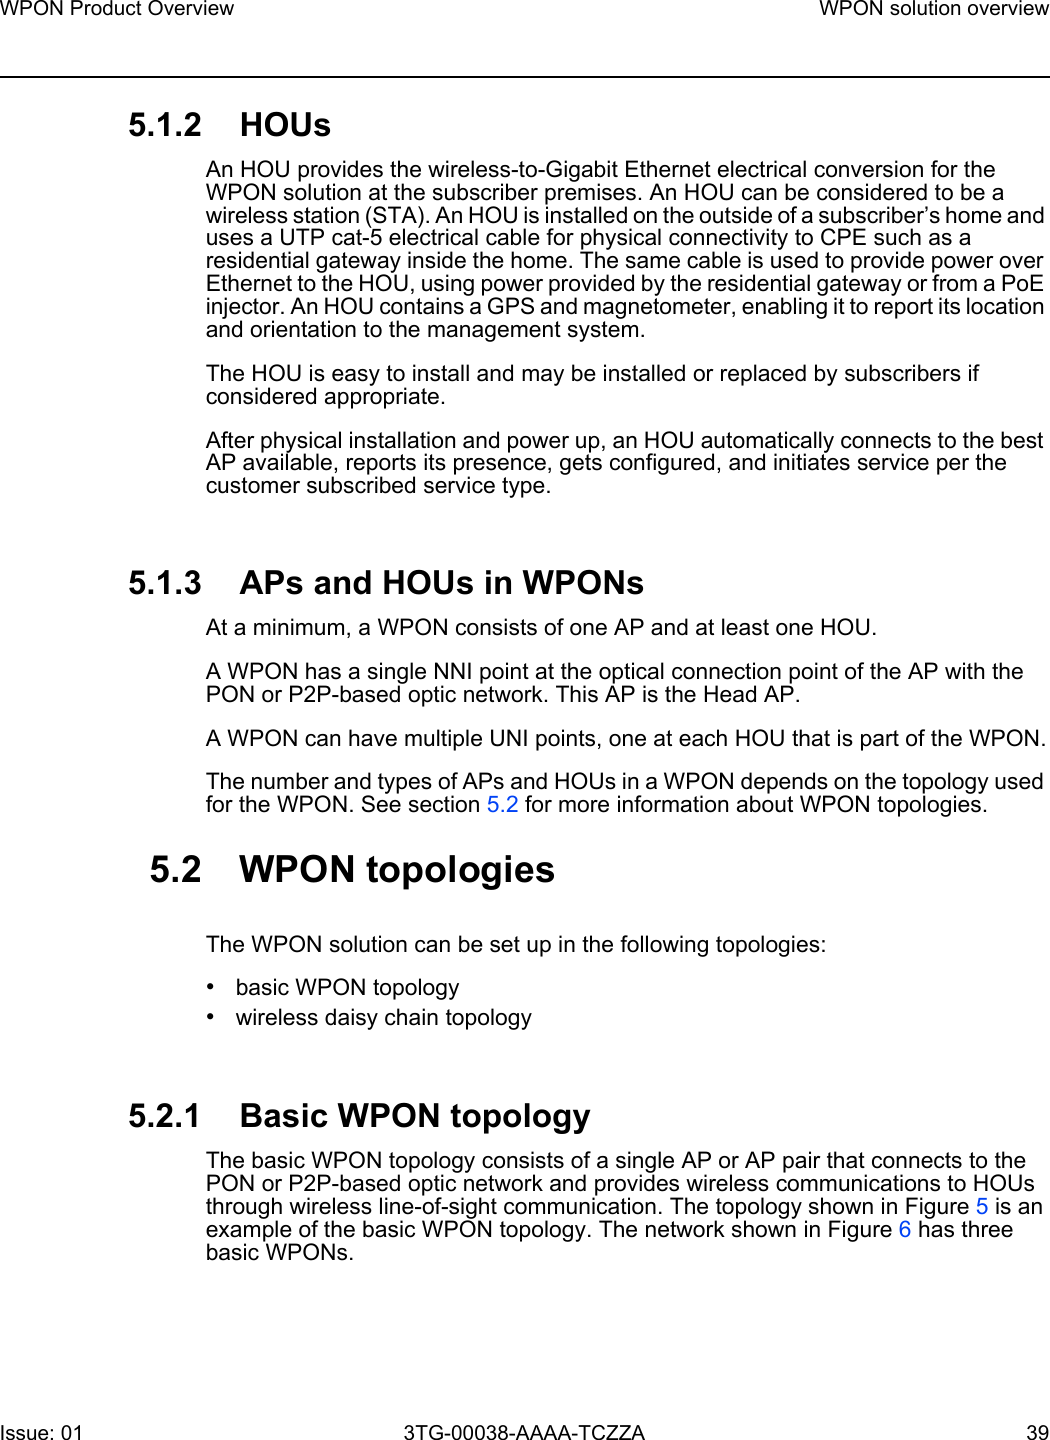 WPON Product Overview WPON solution overviewIssue: 01 3TG-00038-AAAA-TCZZA 39 5.1.2 HOUsAn HOU provides the wireless-to-Gigabit Ethernet electrical conversion for the WPON solution at the subscriber premises. An HOU can be considered to be a wireless station (STA). An HOU is installed on the outside of a subscriber’s home and uses a UTP cat-5 electrical cable for physical connectivity to CPE such as a residential gateway inside the home. The same cable is used to provide power over Ethernet to the HOU, using power provided by the residential gateway or from a PoE injector. An HOU contains a GPS and magnetometer, enabling it to report its location and orientation to the management system.The HOU is easy to install and may be installed or replaced by subscribers if considered appropriate. After physical installation and power up, an HOU automatically connects to the best AP available, reports its presence, gets configured, and initiates service per the customer subscribed service type.5.1.3 APs and HOUs in WPONsAt a minimum, a WPON consists of one AP and at least one HOU.A WPON has a single NNI point at the optical connection point of the AP with the PON or P2P-based optic network. This AP is the Head AP.A WPON can have multiple UNI points, one at each HOU that is part of the WPON.The number and types of APs and HOUs in a WPON depends on the topology used for the WPON. See section 5.2 for more information about WPON topologies.5.2 WPON topologiesThe WPON solution can be set up in the following topologies:•basic WPON topology•wireless daisy chain topology5.2.1 Basic WPON topologyThe basic WPON topology consists of a single AP or AP pair that connects to the PON or P2P-based optic network and provides wireless communications to HOUs through wireless line-of-sight communication. The topology shown in Figure 5 is an example of the basic WPON topology. The network shown in Figure 6 has three basic WPONs.